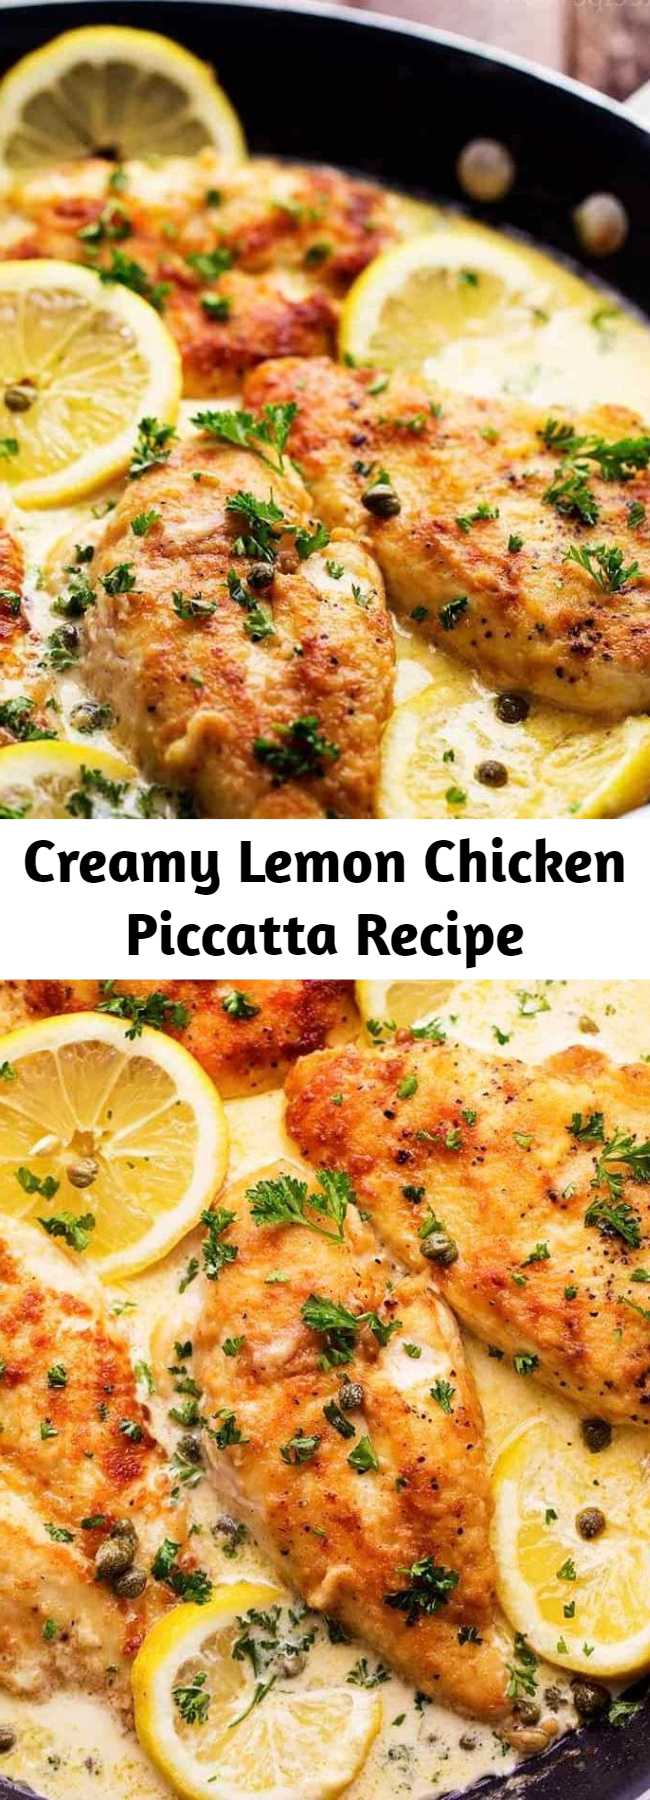 Creamy Lemon Chicken Piccatta Recipe - A quick and easy one pot meal that is on the dinner table in 30 minutes! Tender breaded chicken in a creamy lemon sauce that the entire family will love!